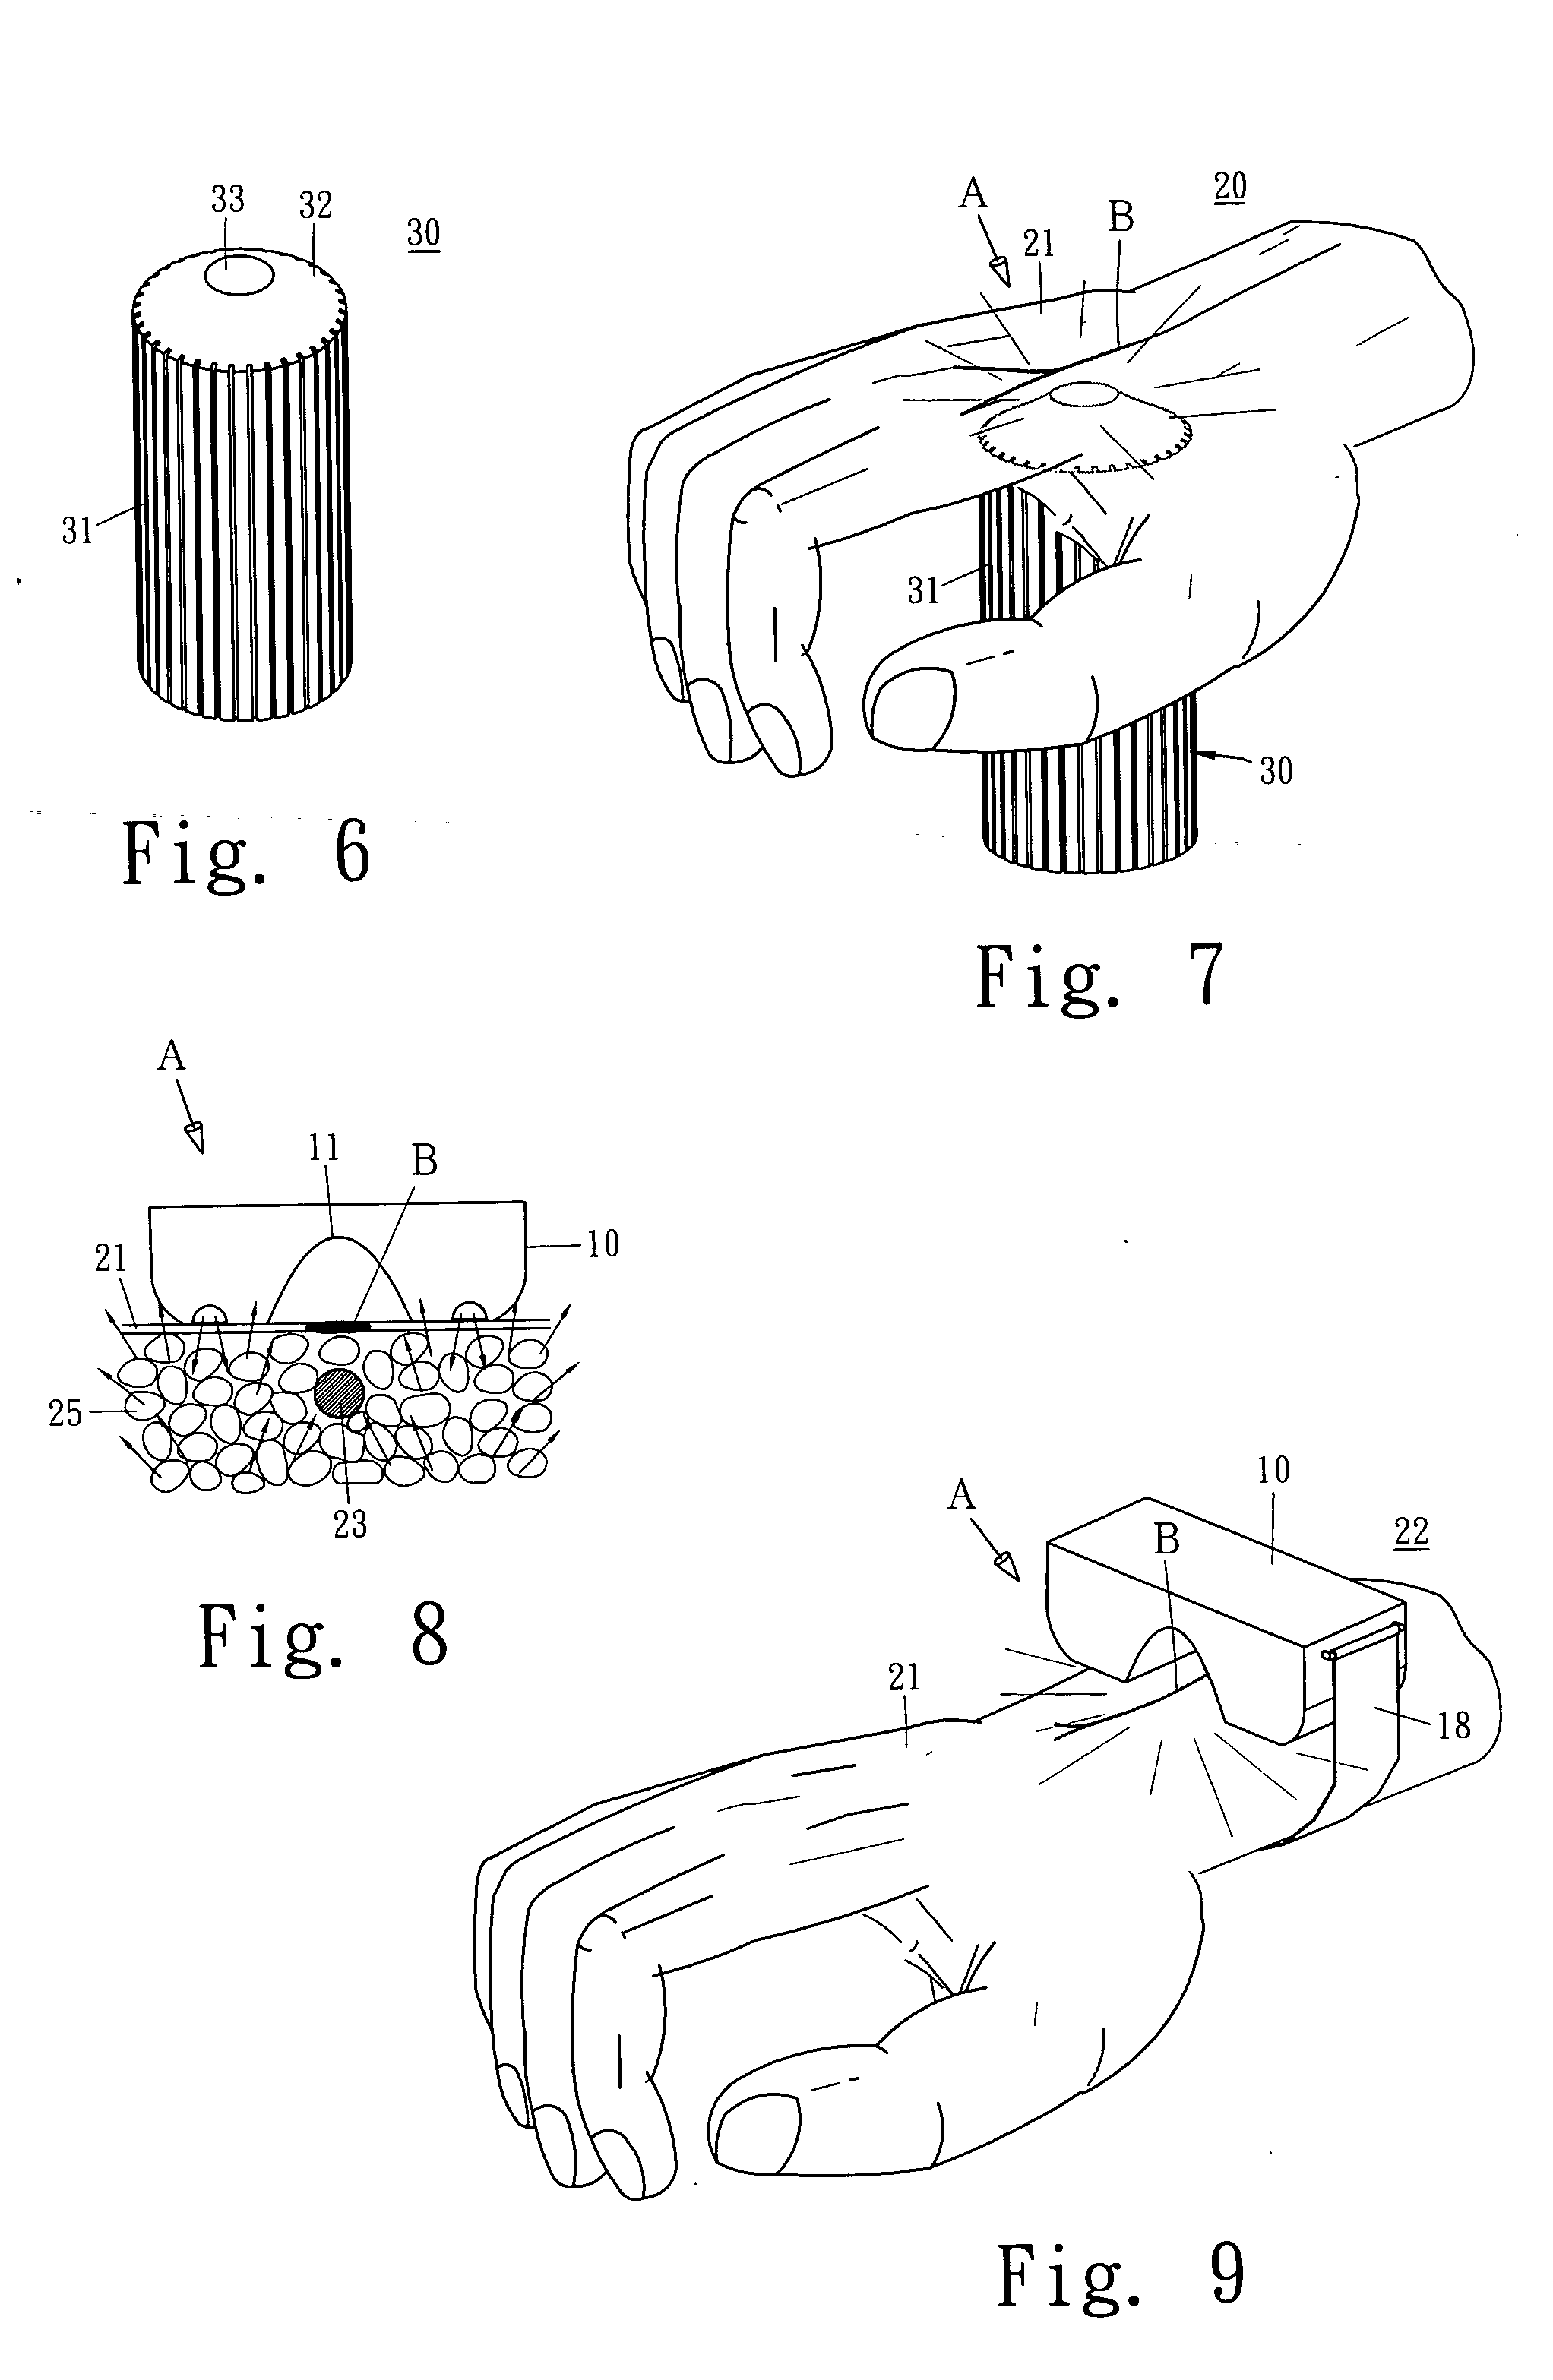 Method and apparatus for locating superficial veins or specific structures with a LED light source